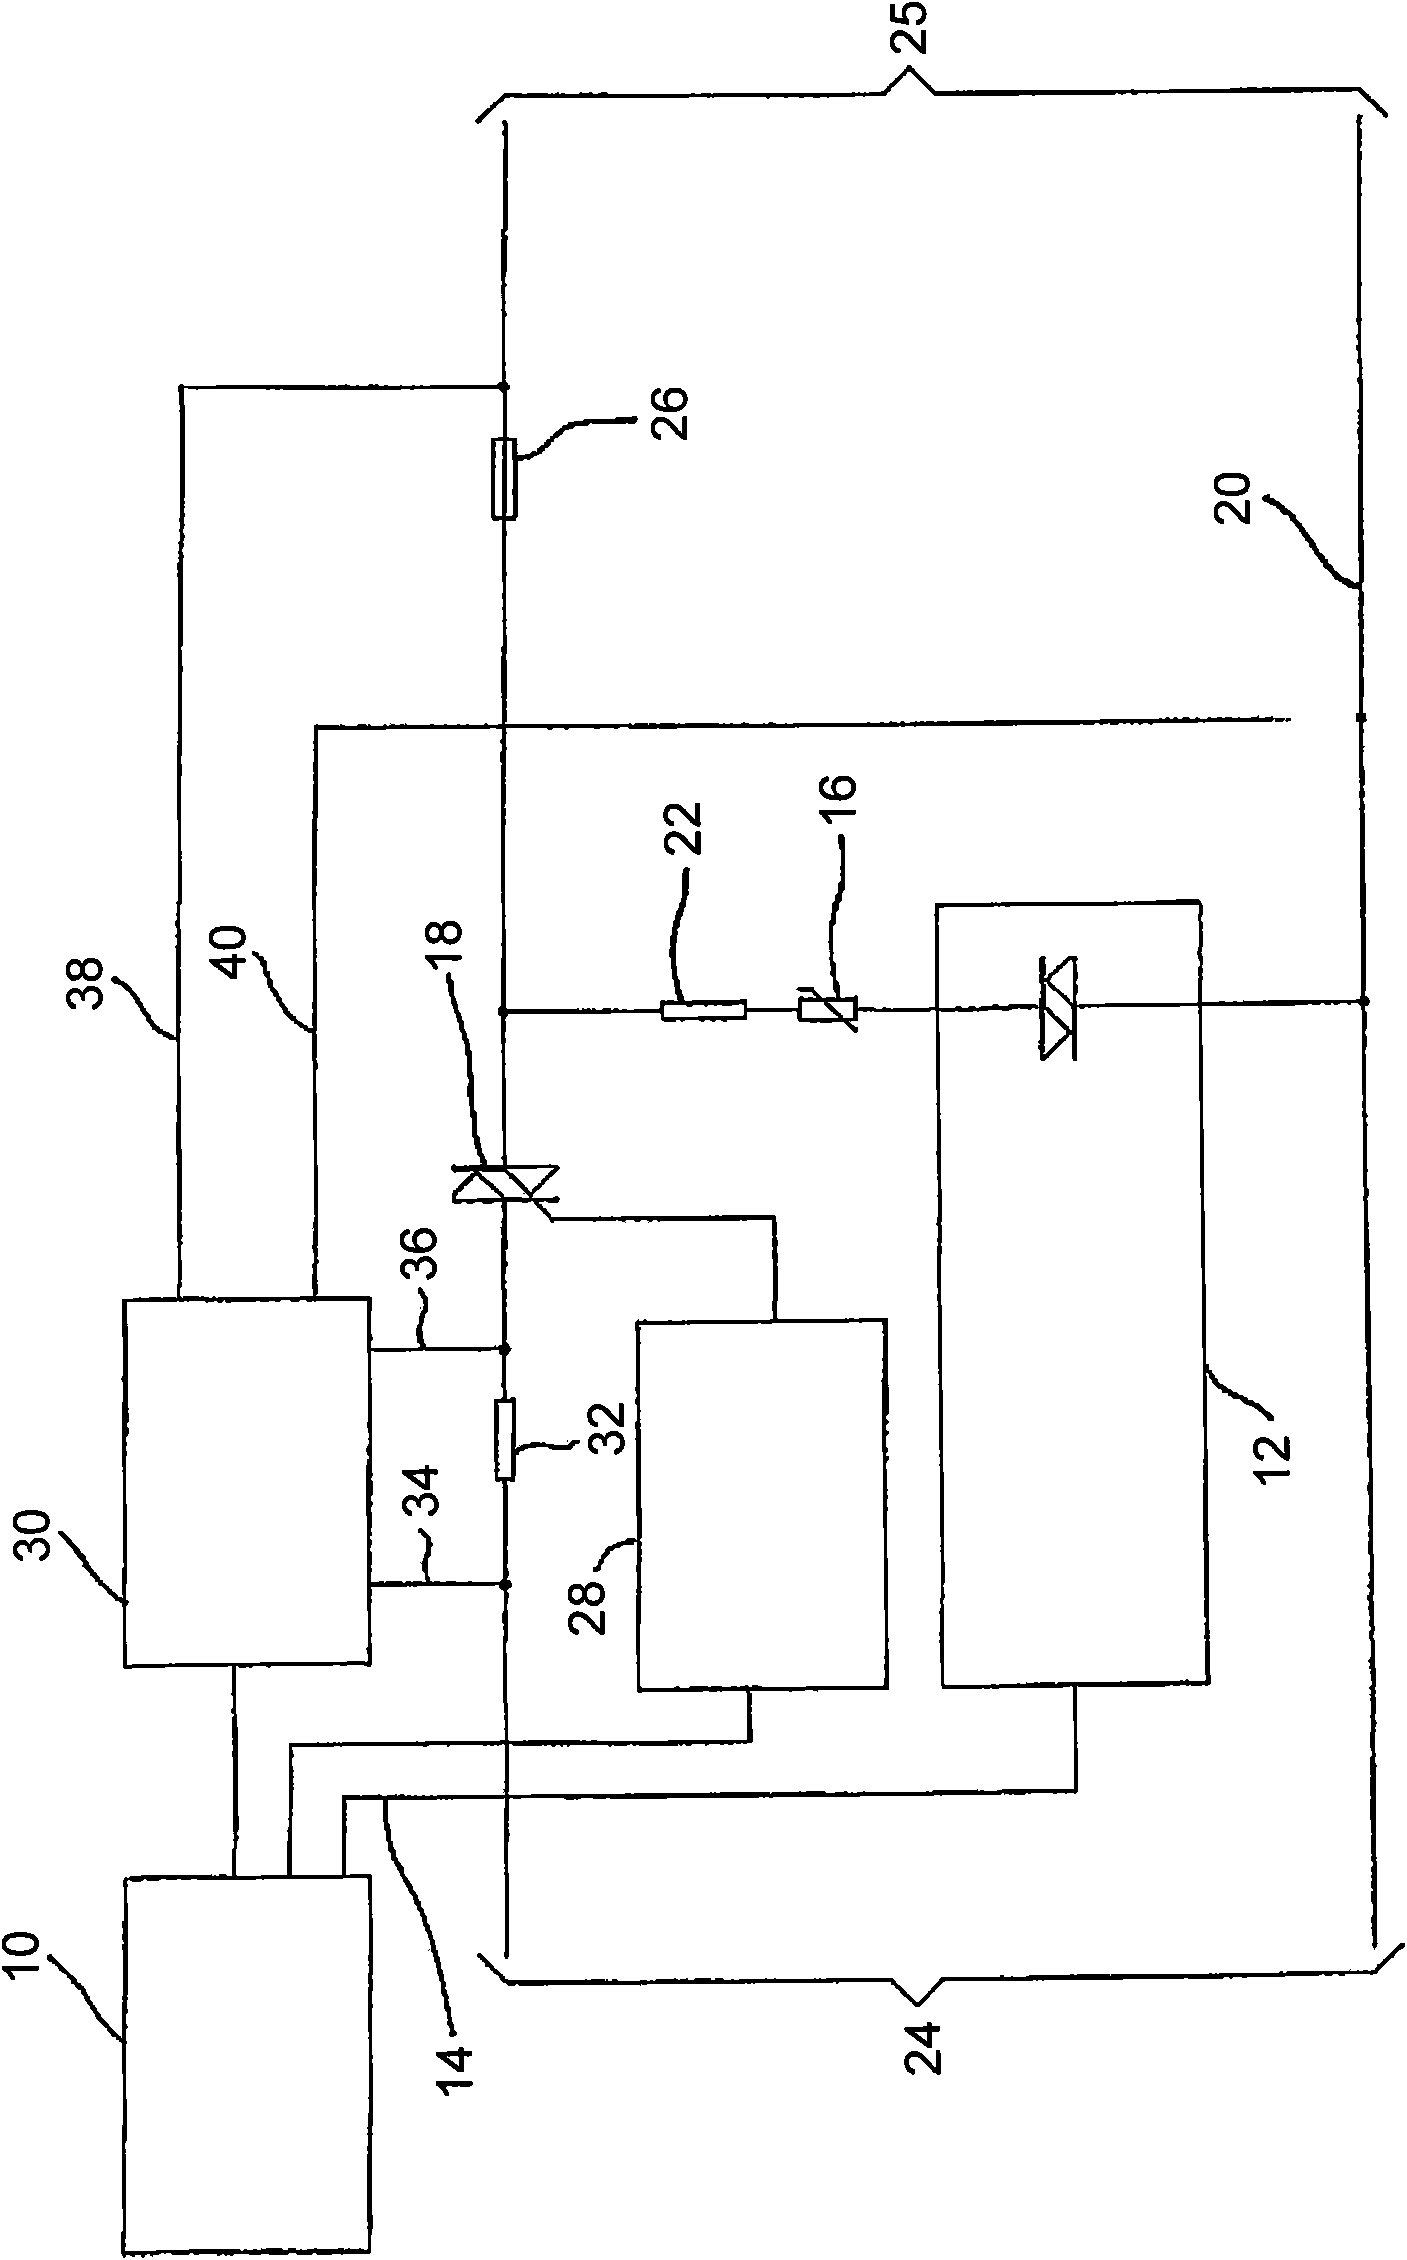 Induced voltage suppressor for use in a traffic signal controller